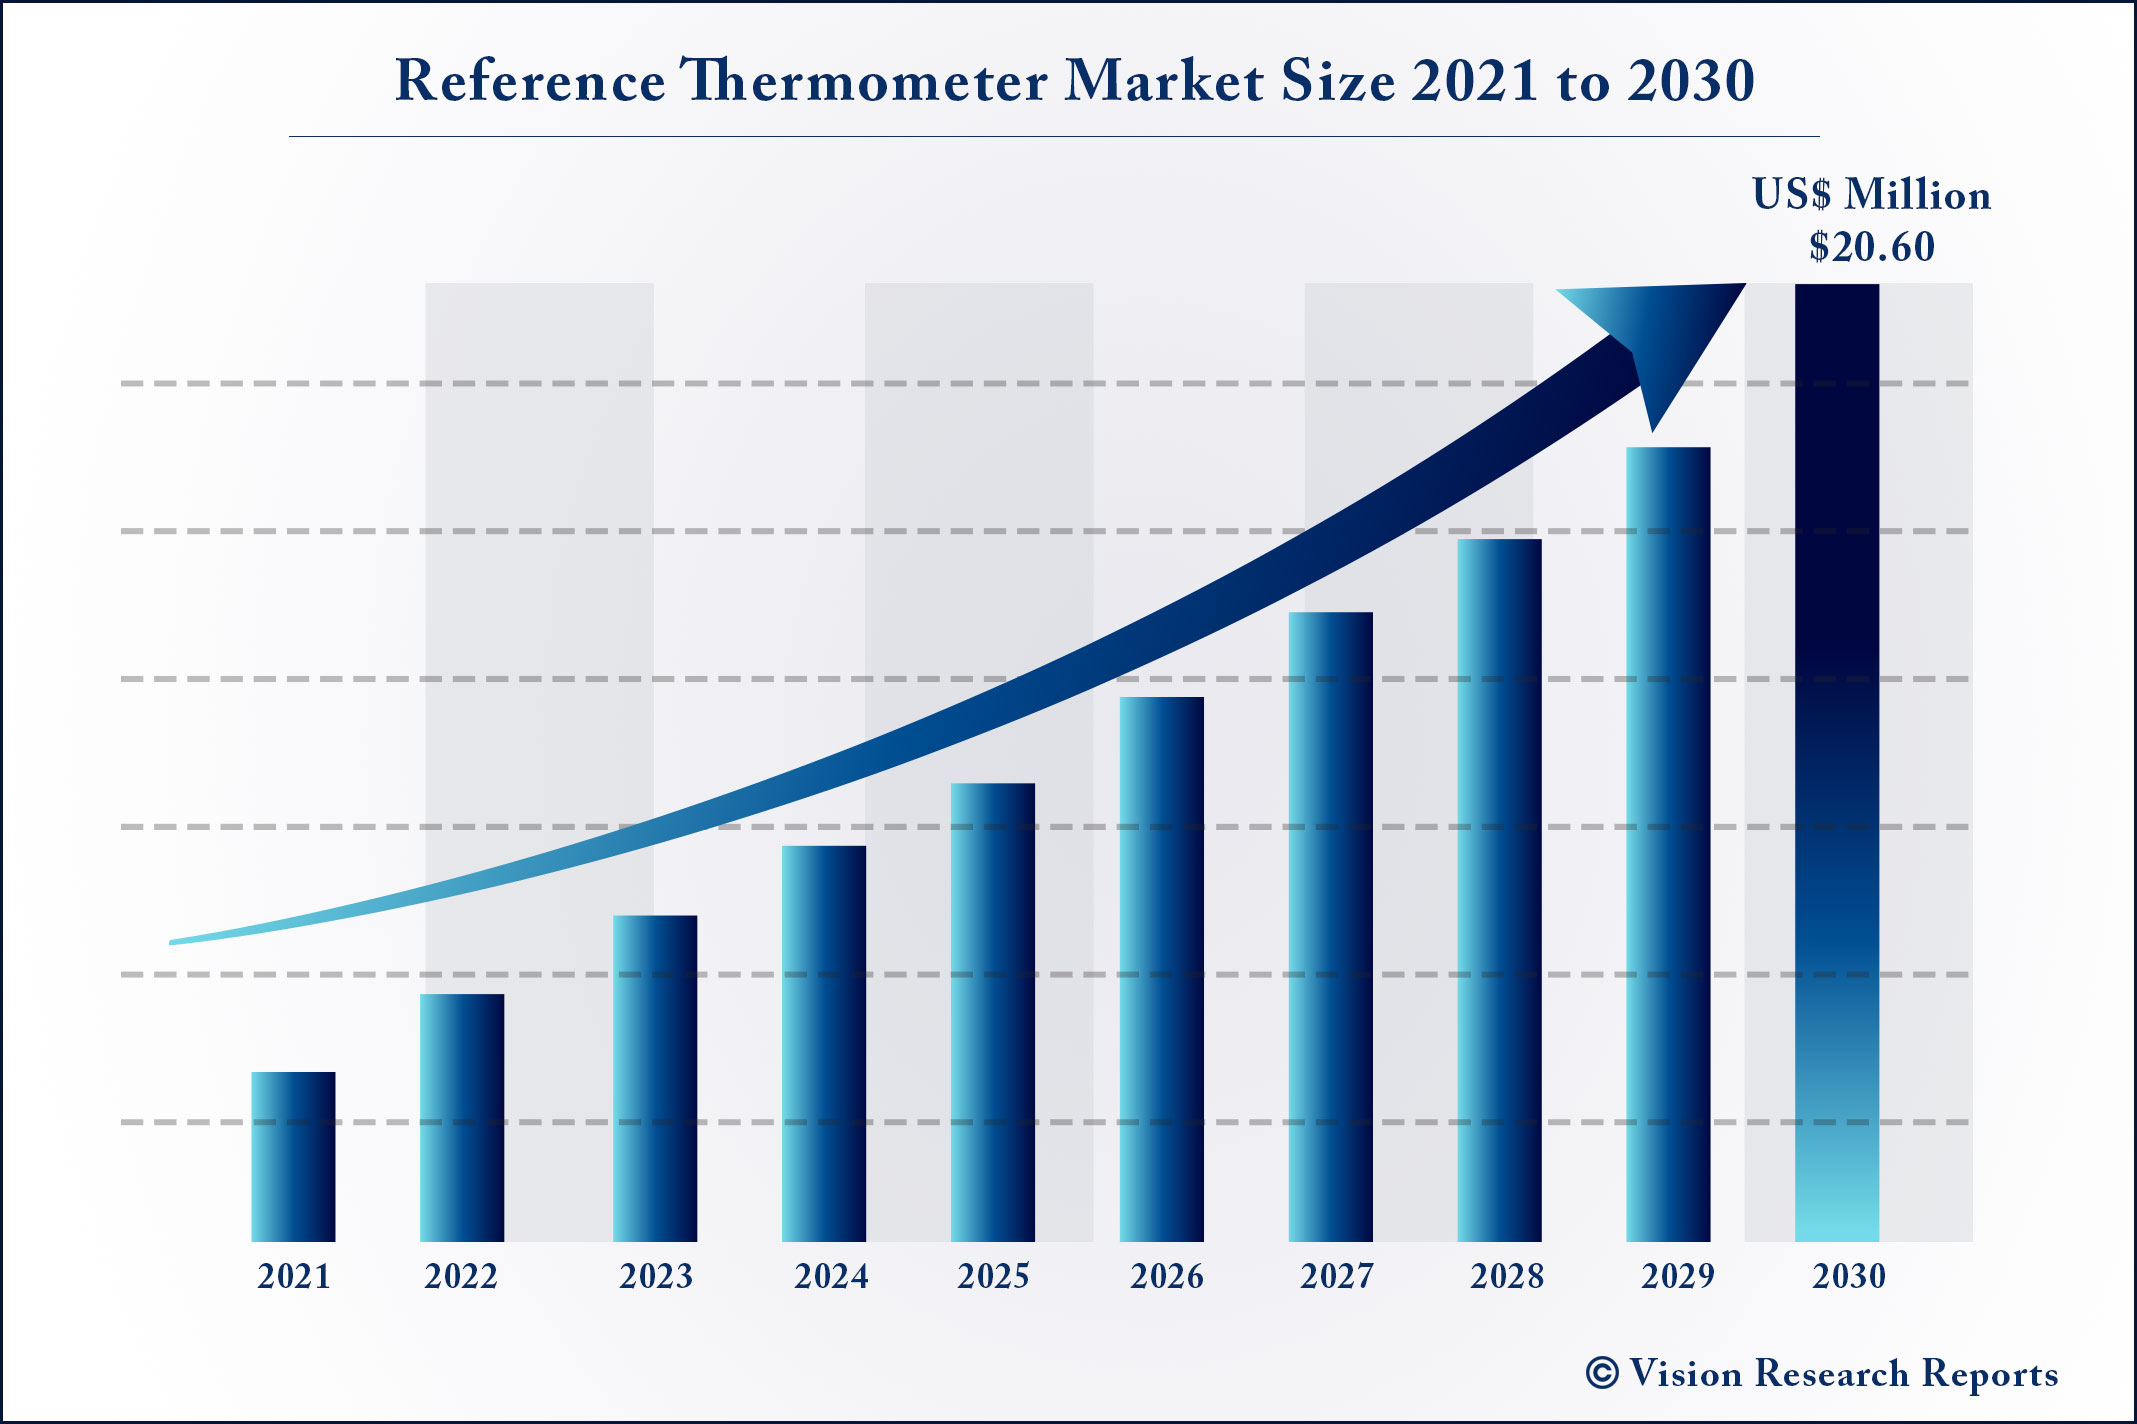 Reference Thermometer Market Size 2021 to 2030